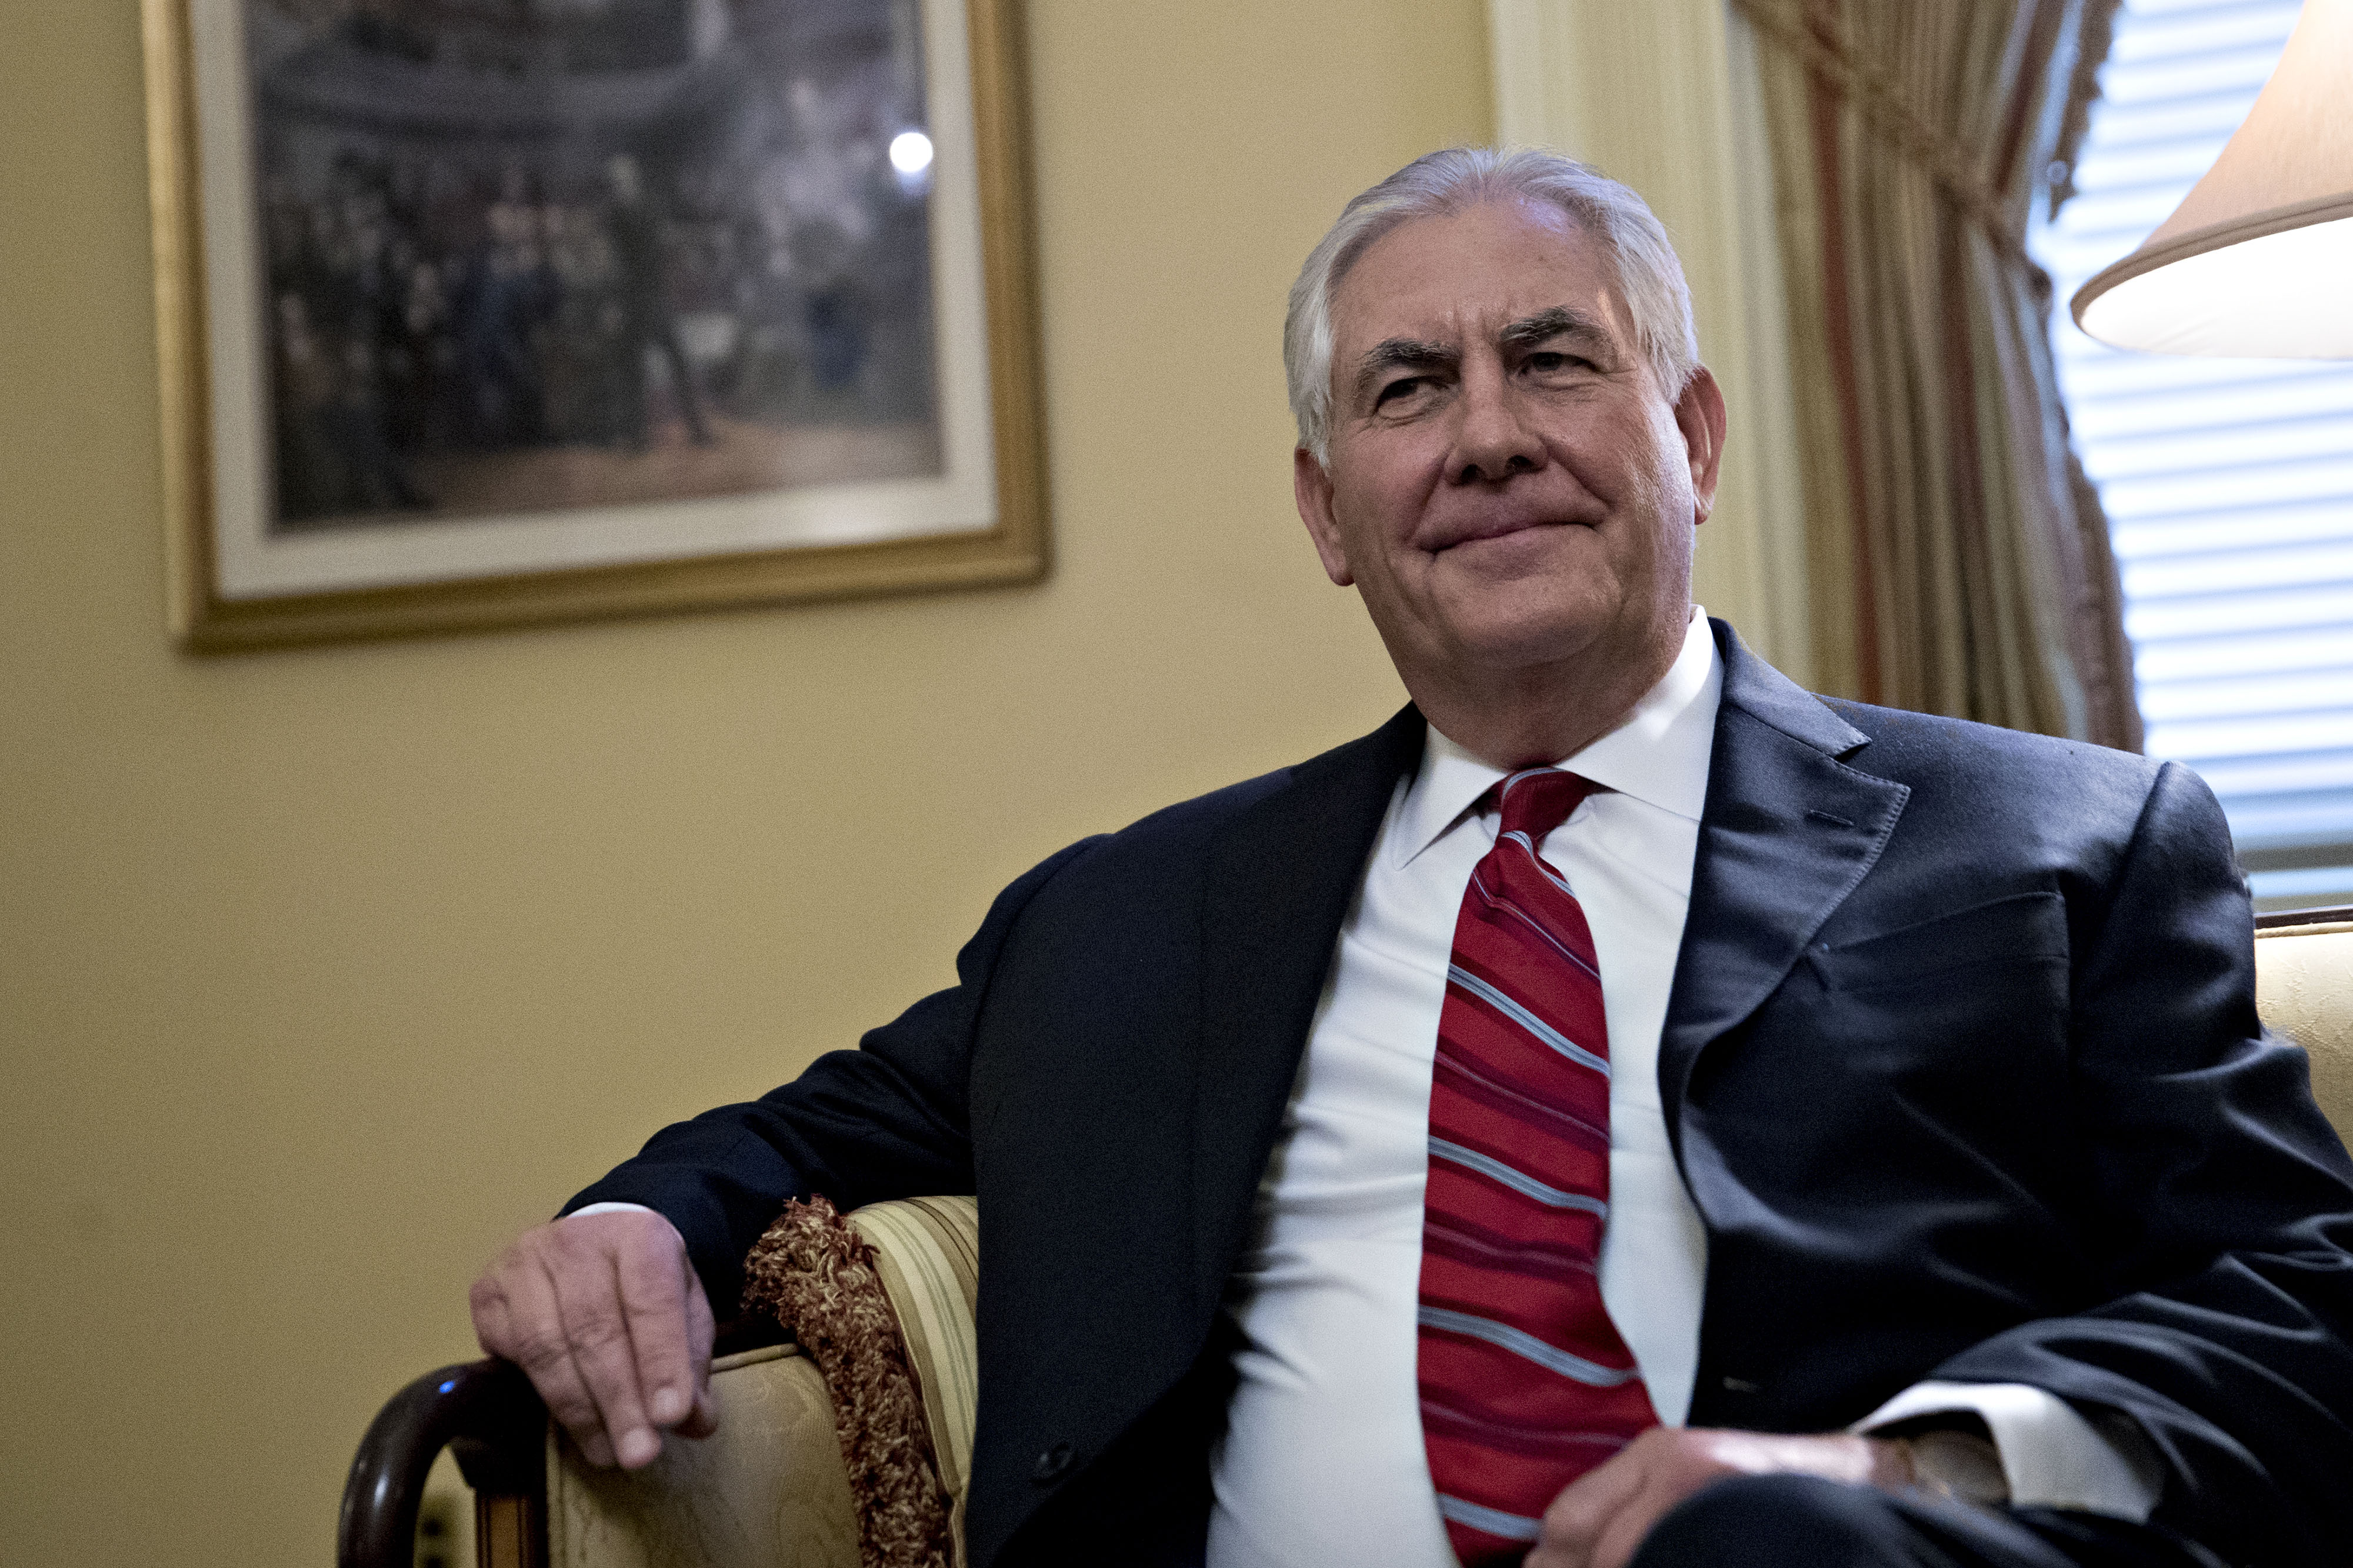 Rex Tillerson, former chief executive officer of Exxon Mobile Corp. and U.S. secretary of state nominee for president-elect Donald Trump, sits during a meeting with Senate Majority Leader Mitch McConnell, a Republican from Kentucky, not pictured, on Capitol Hill in Washington, D.C., U.S., on Wednesday, Jan. 4, 2017. (Andrew Harrer—Bloomberg/Getty Images)